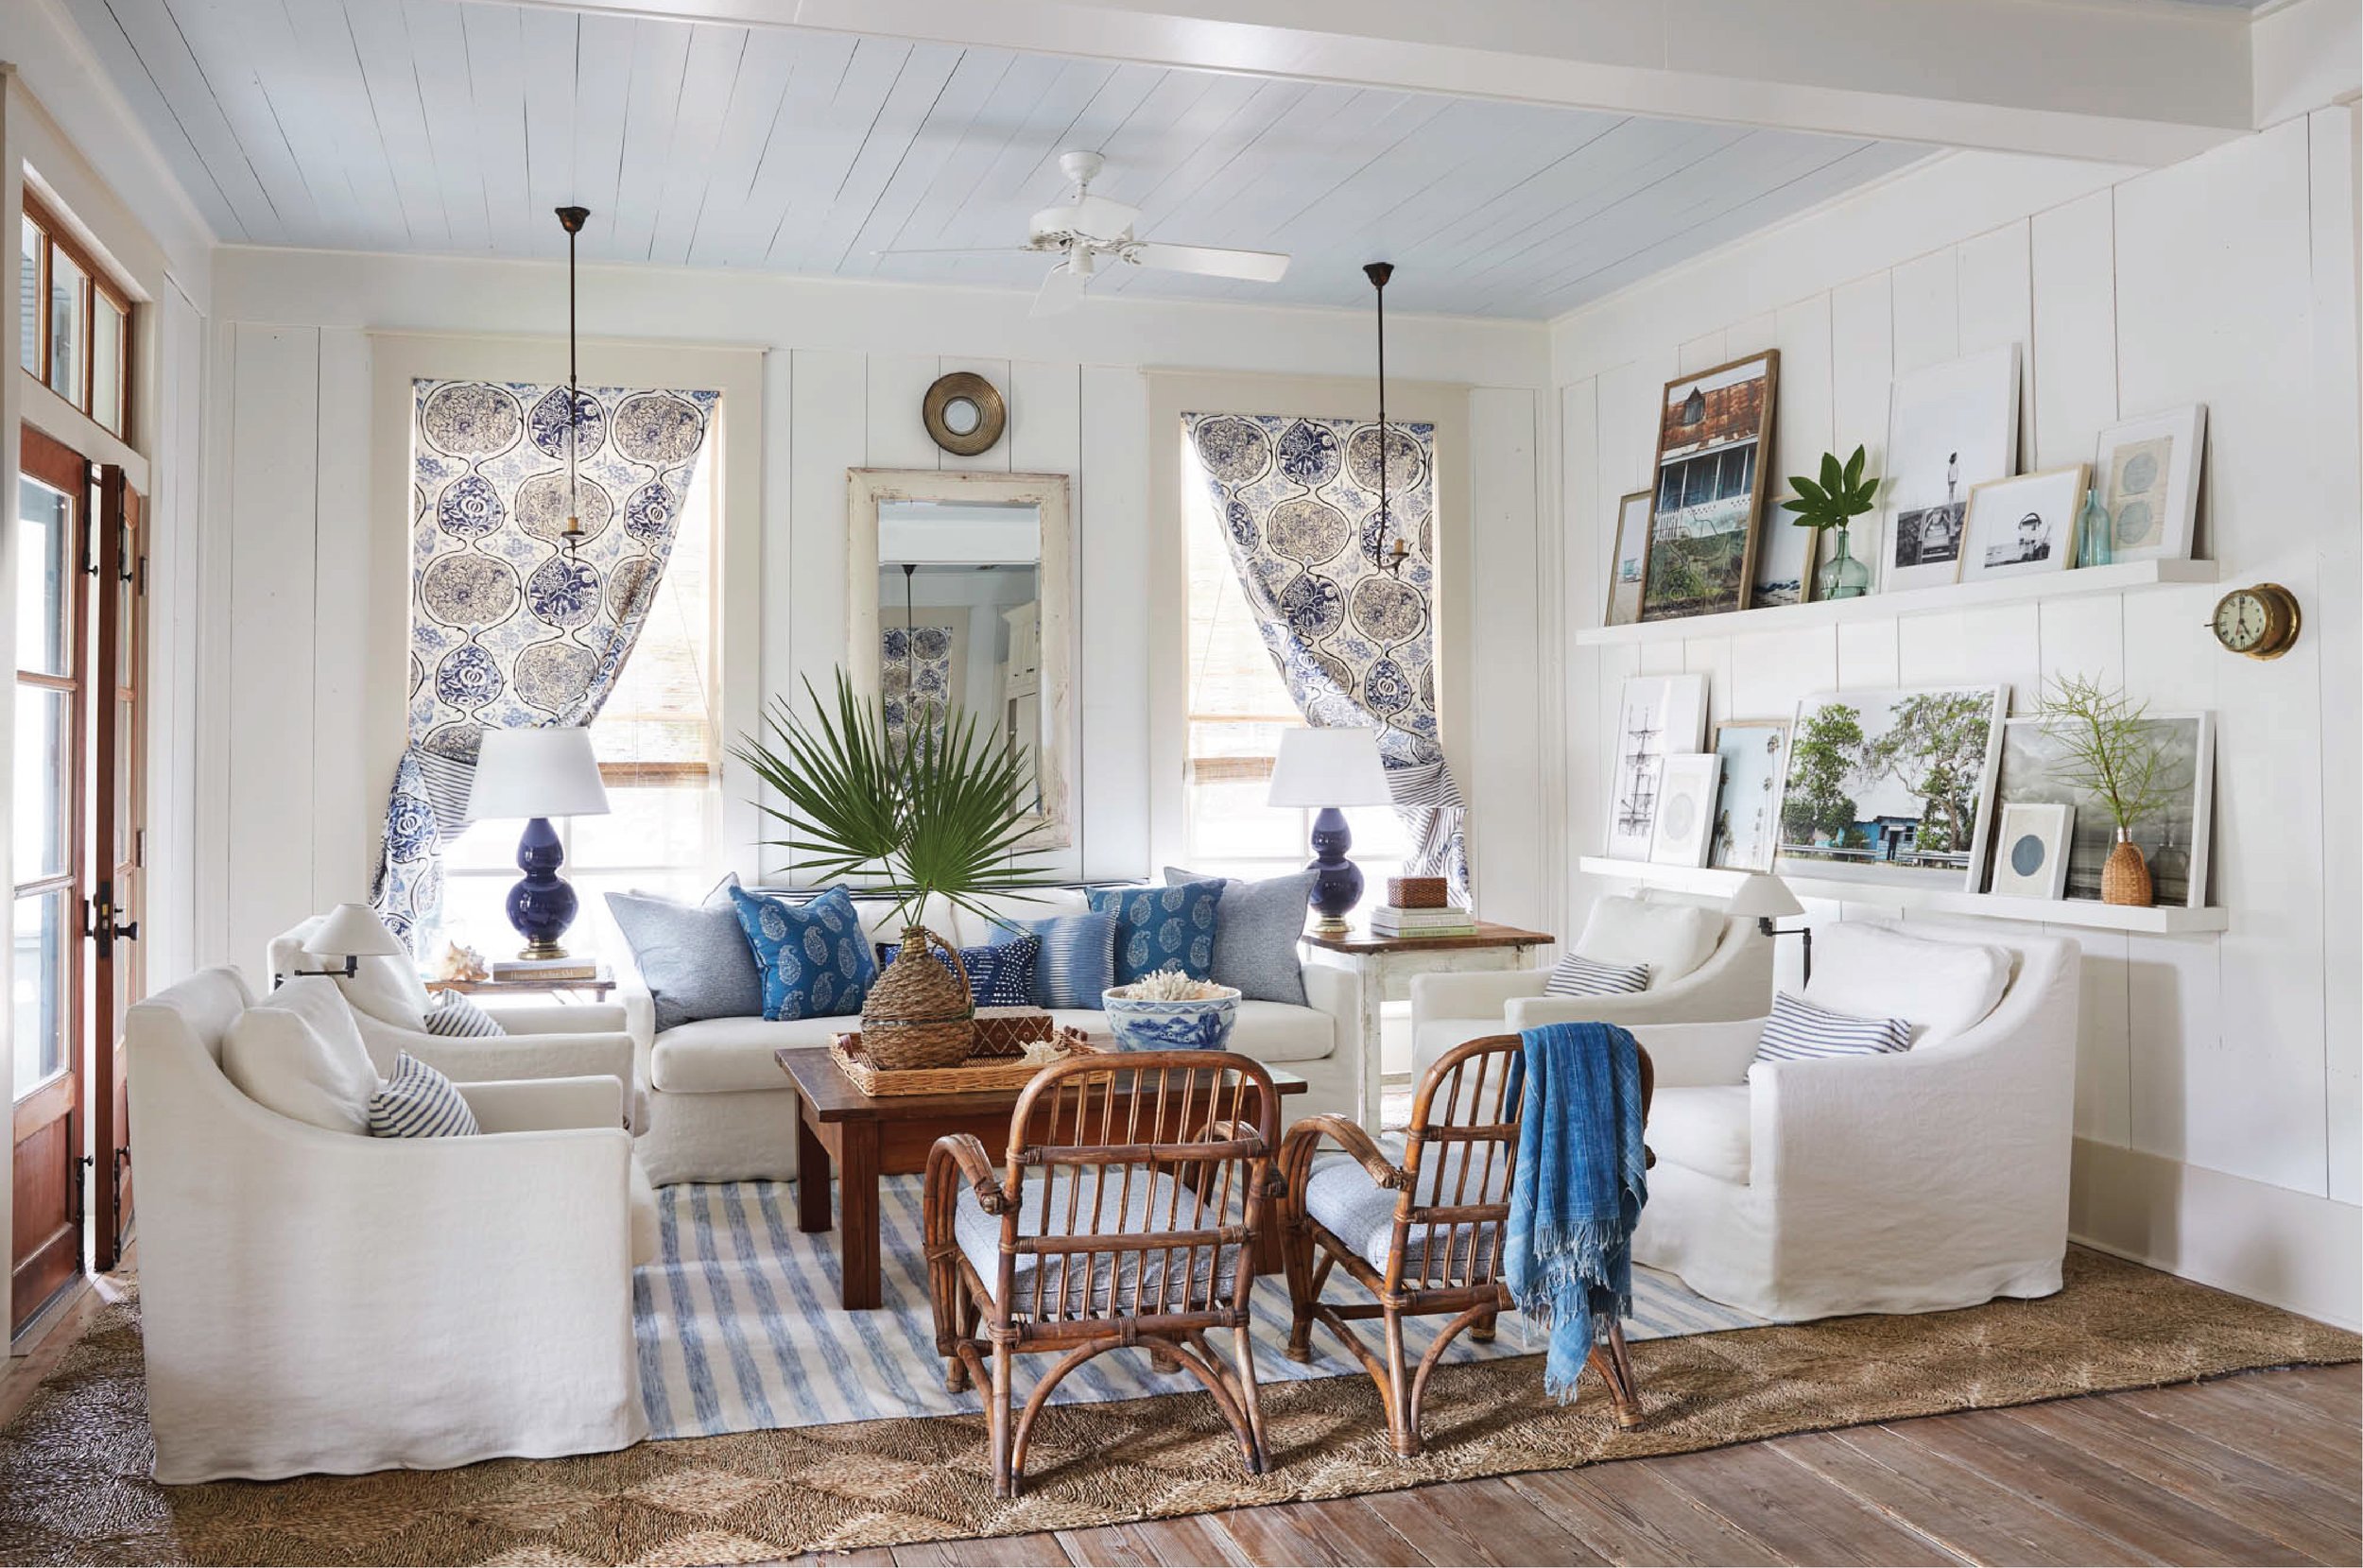 White and blue living room with coastal style featured in interiors designed by Heather Chadduck